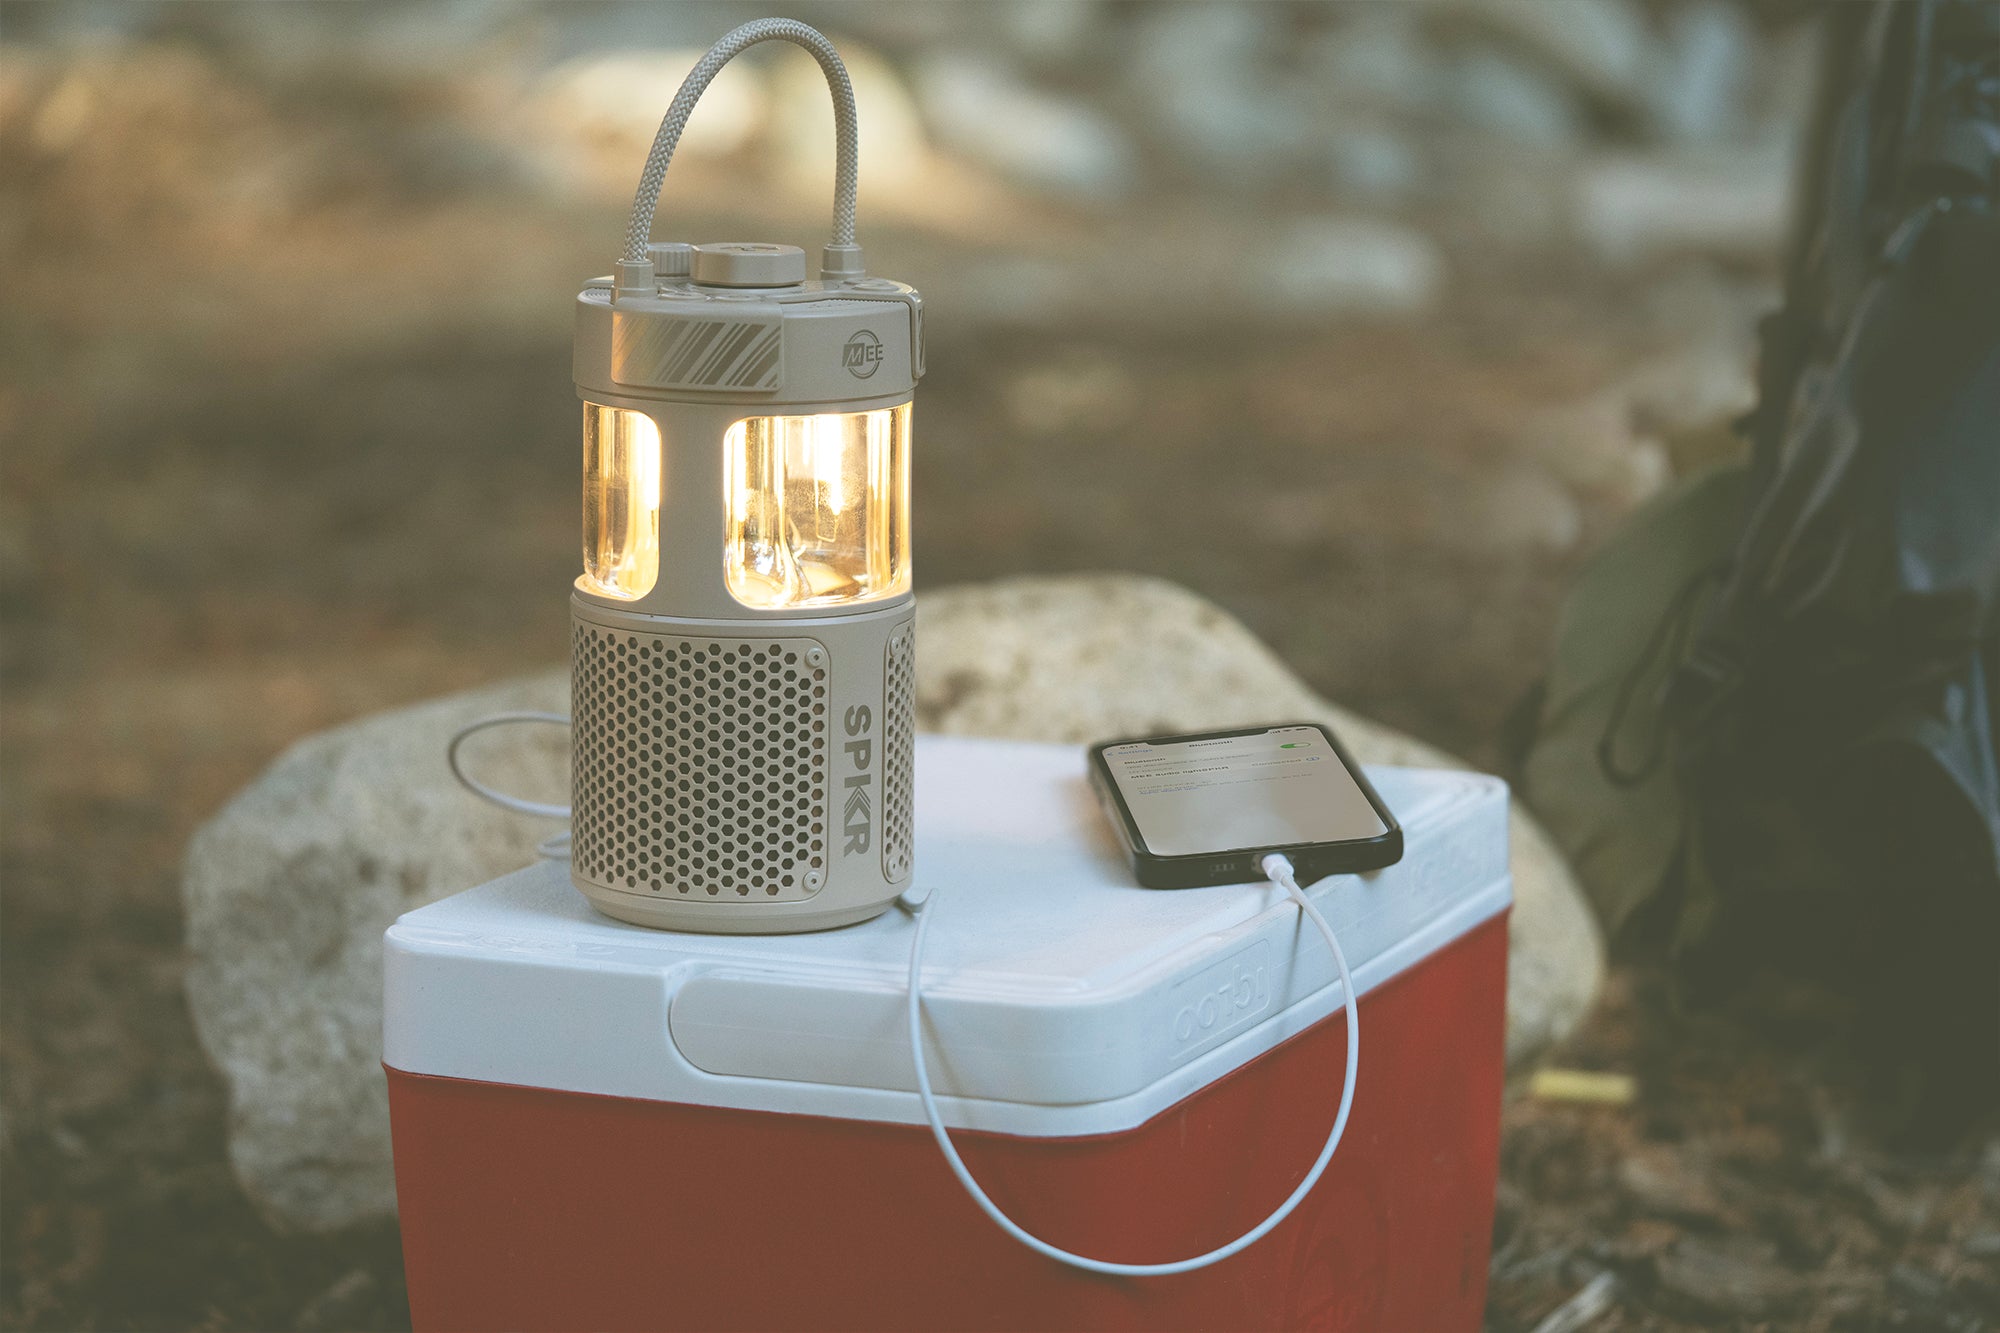 A portable lantern on a red and white cooler in a forest setting, connected by a cable to a smartphone, suggesting the lantern is charging the phone.